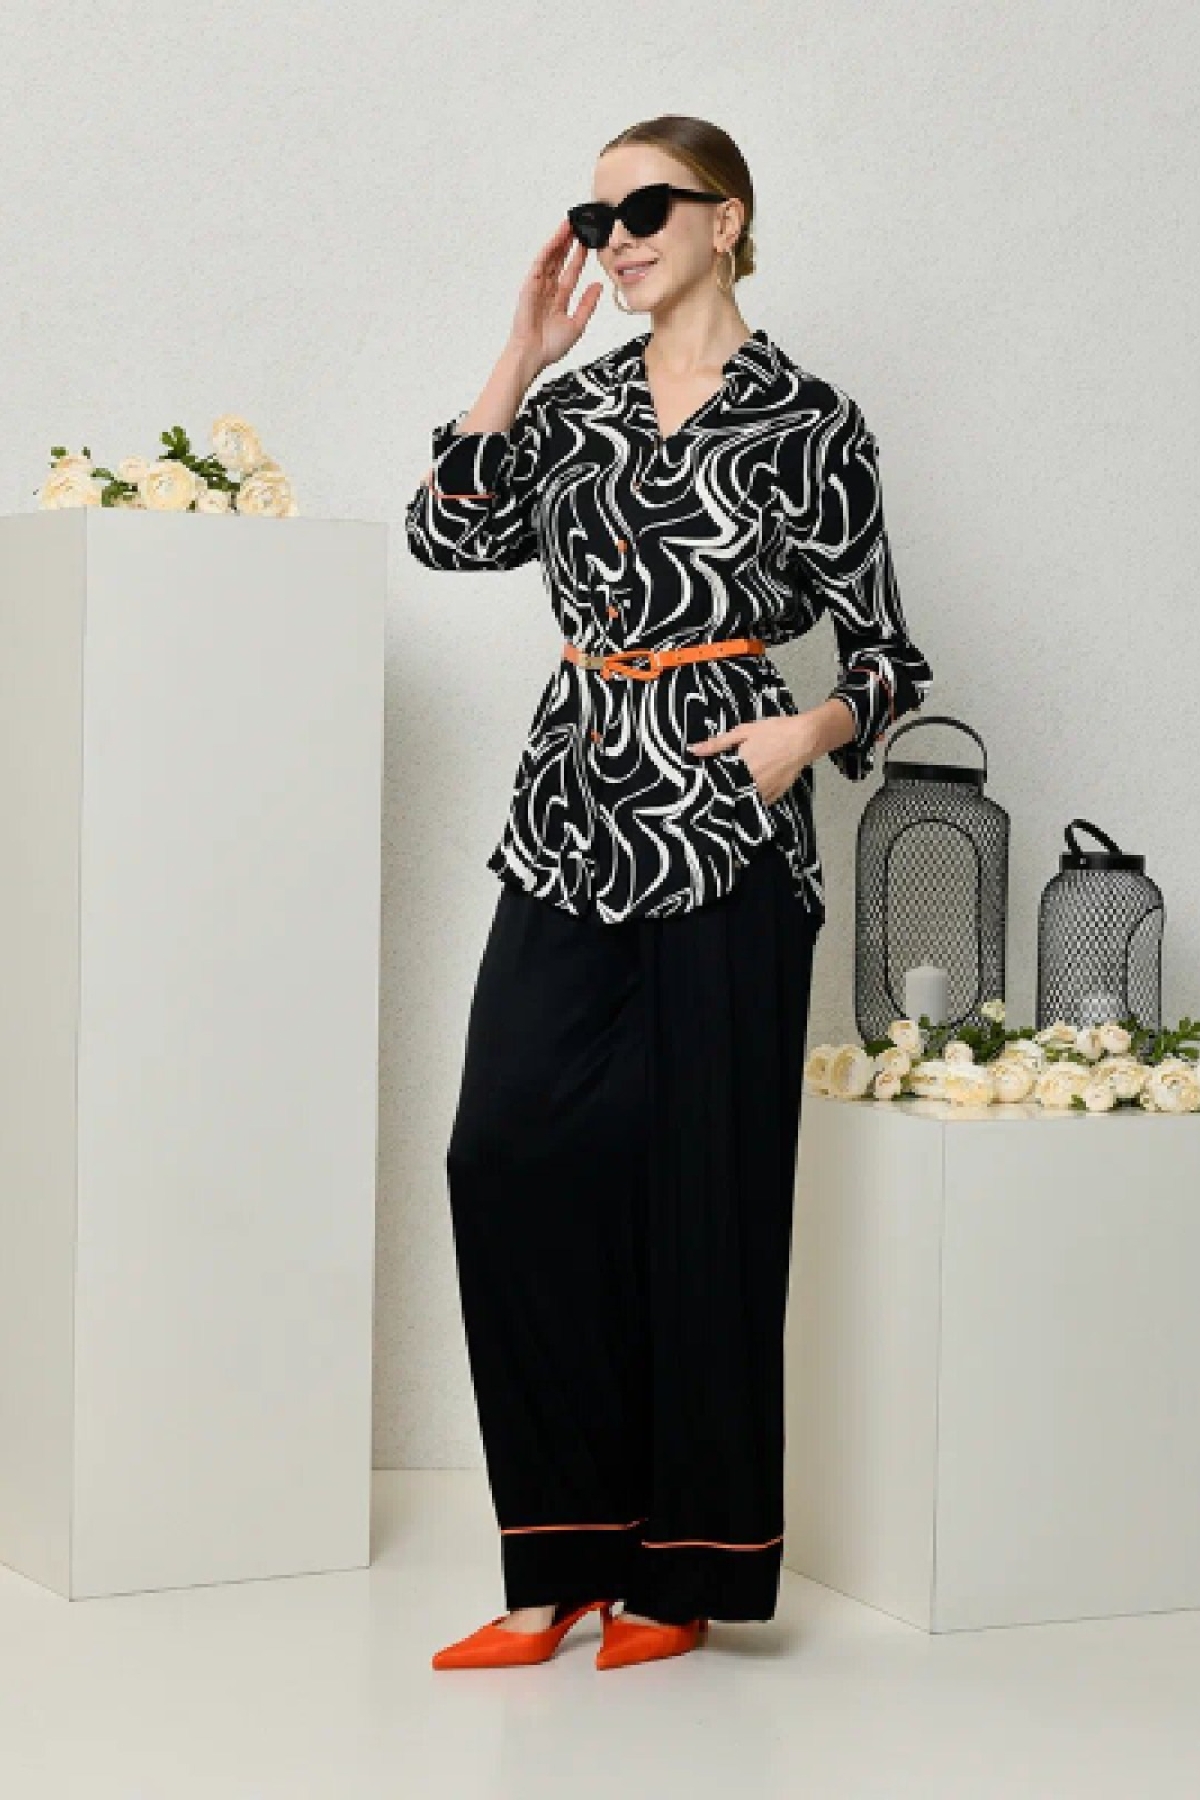 Pants and Blouse-Black